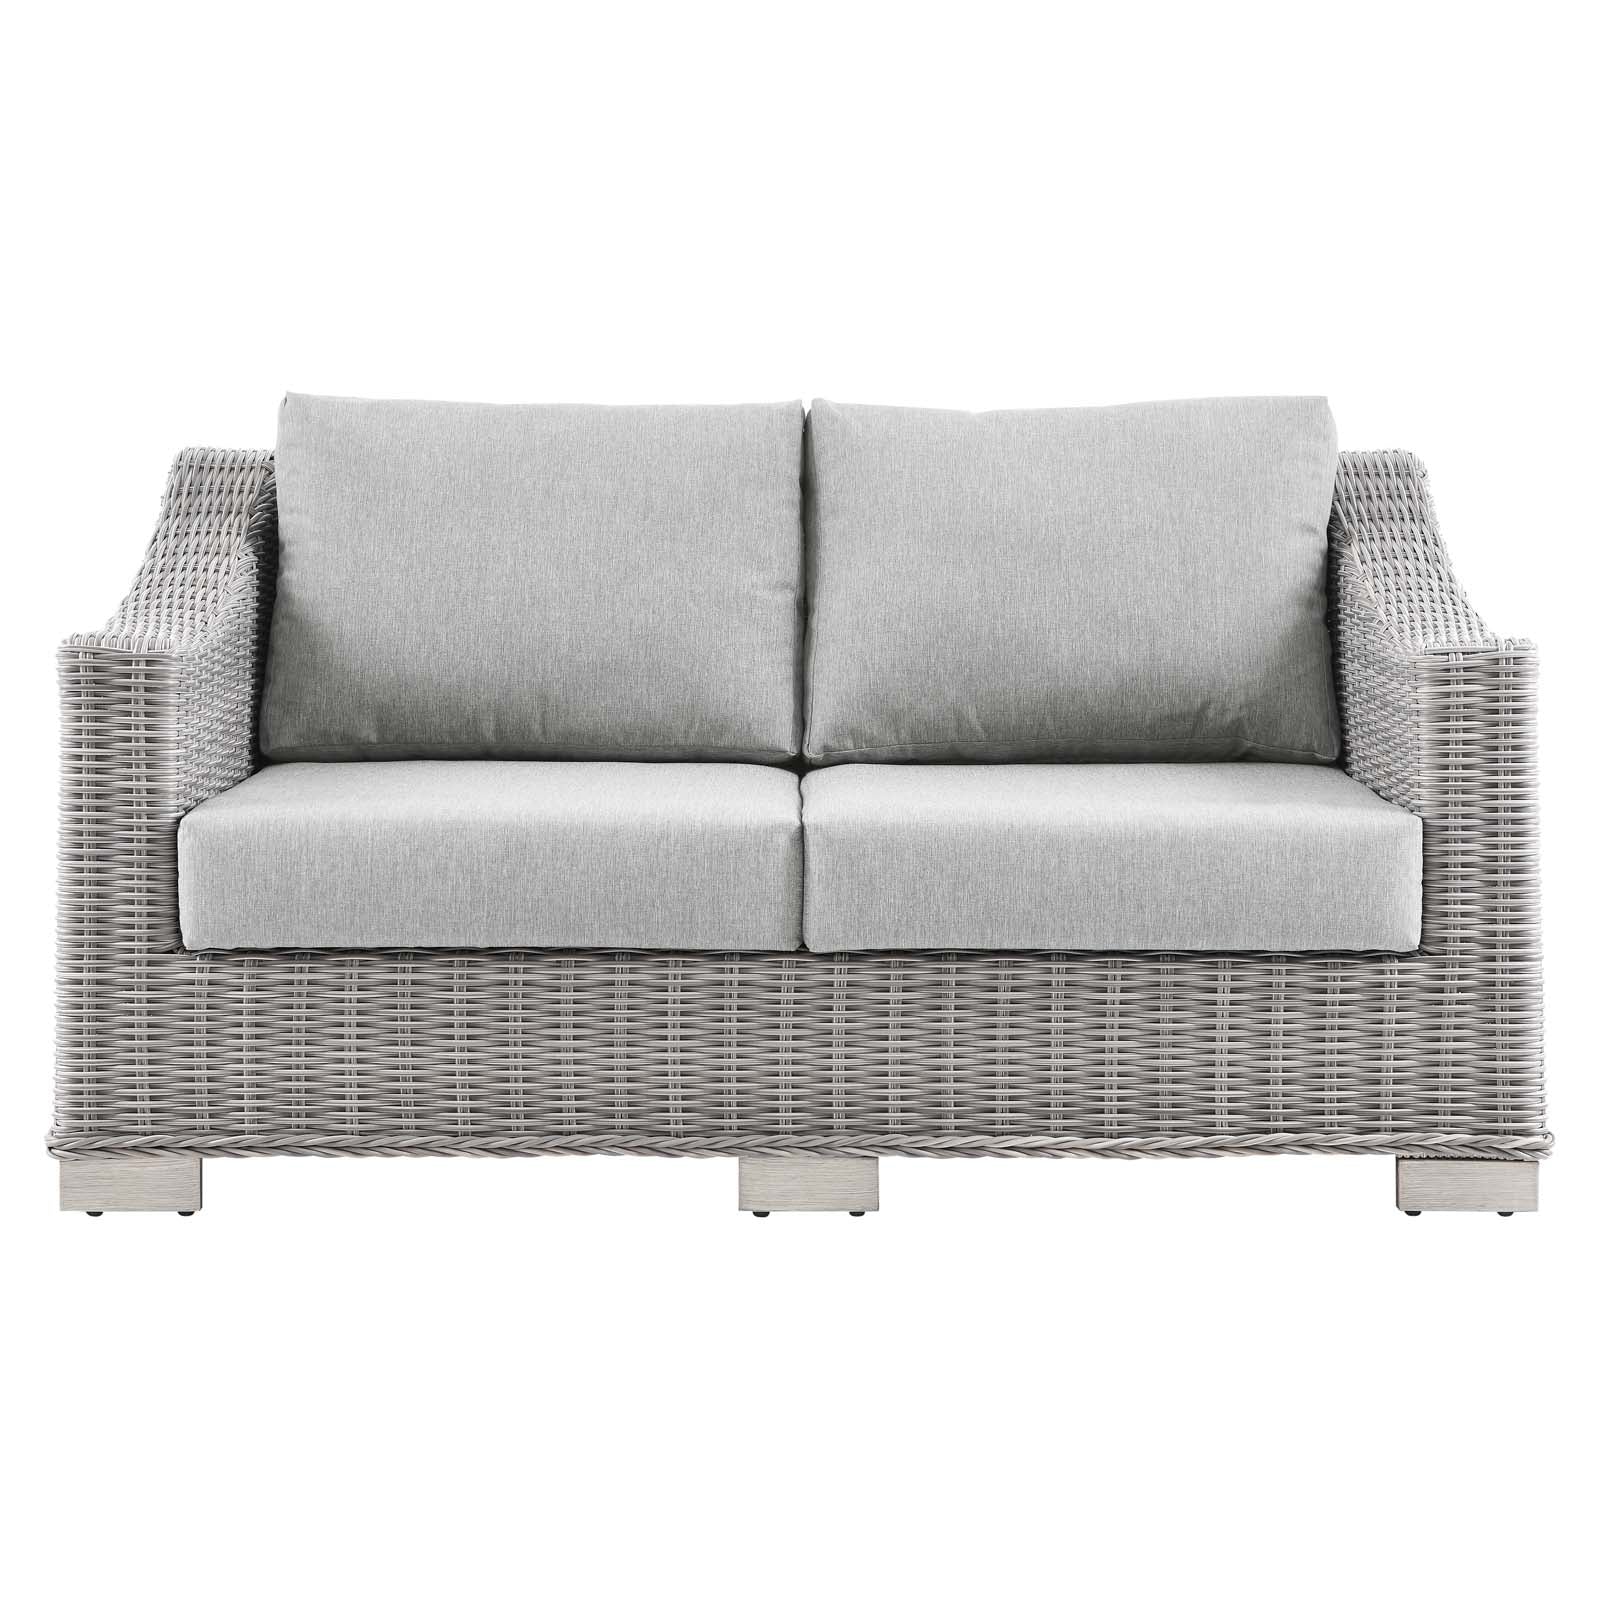 Modway Outdoor Sofas - Conway Outdoor Patio Wicker Rattan Loveseat Light Gray